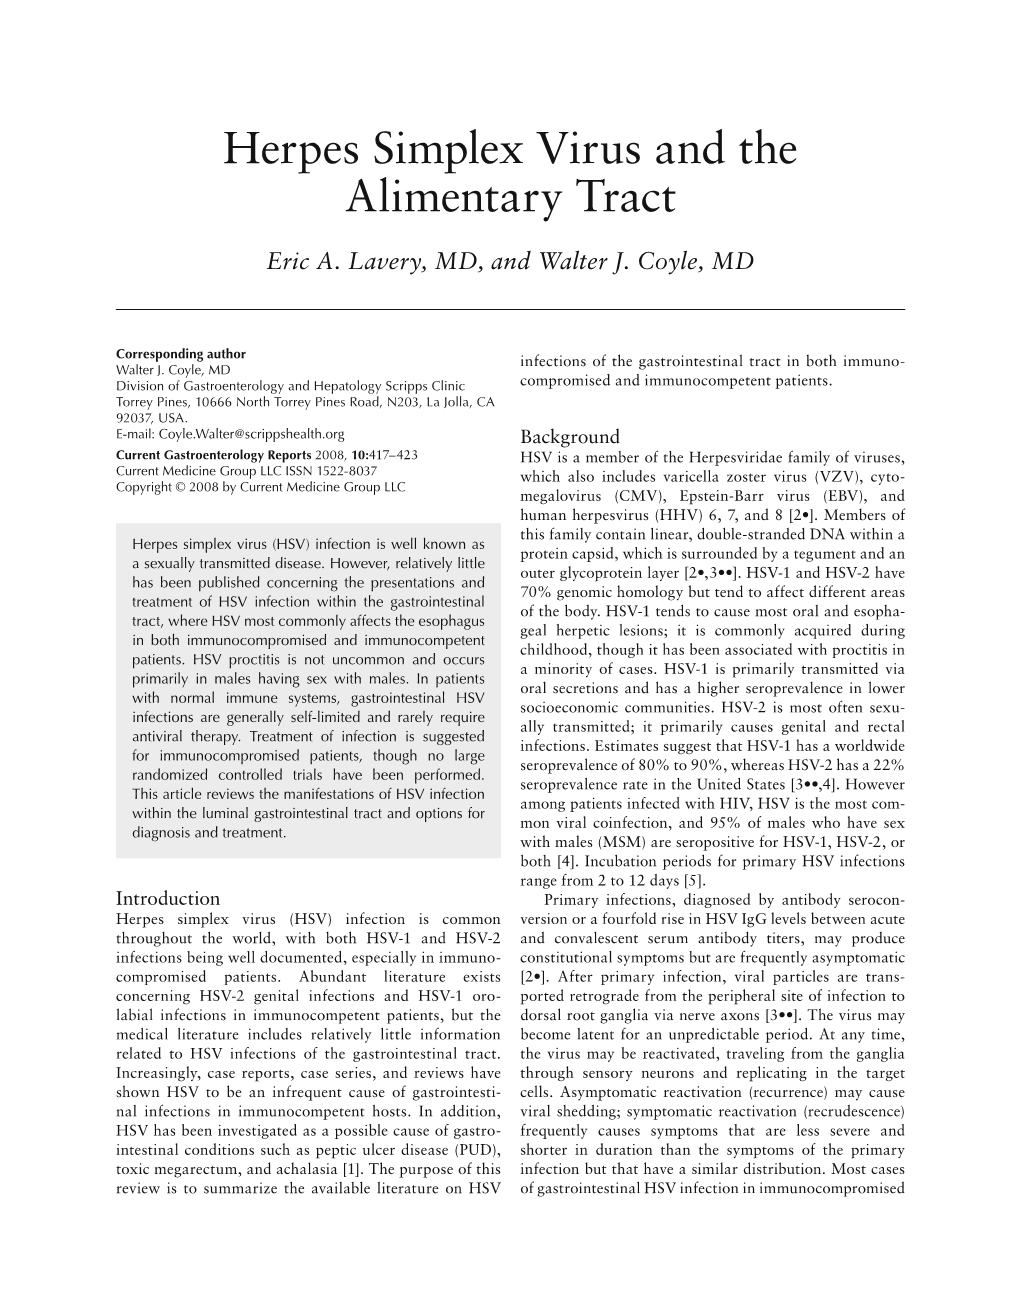 Herpes Simplex Virus and the Alimentary Tract